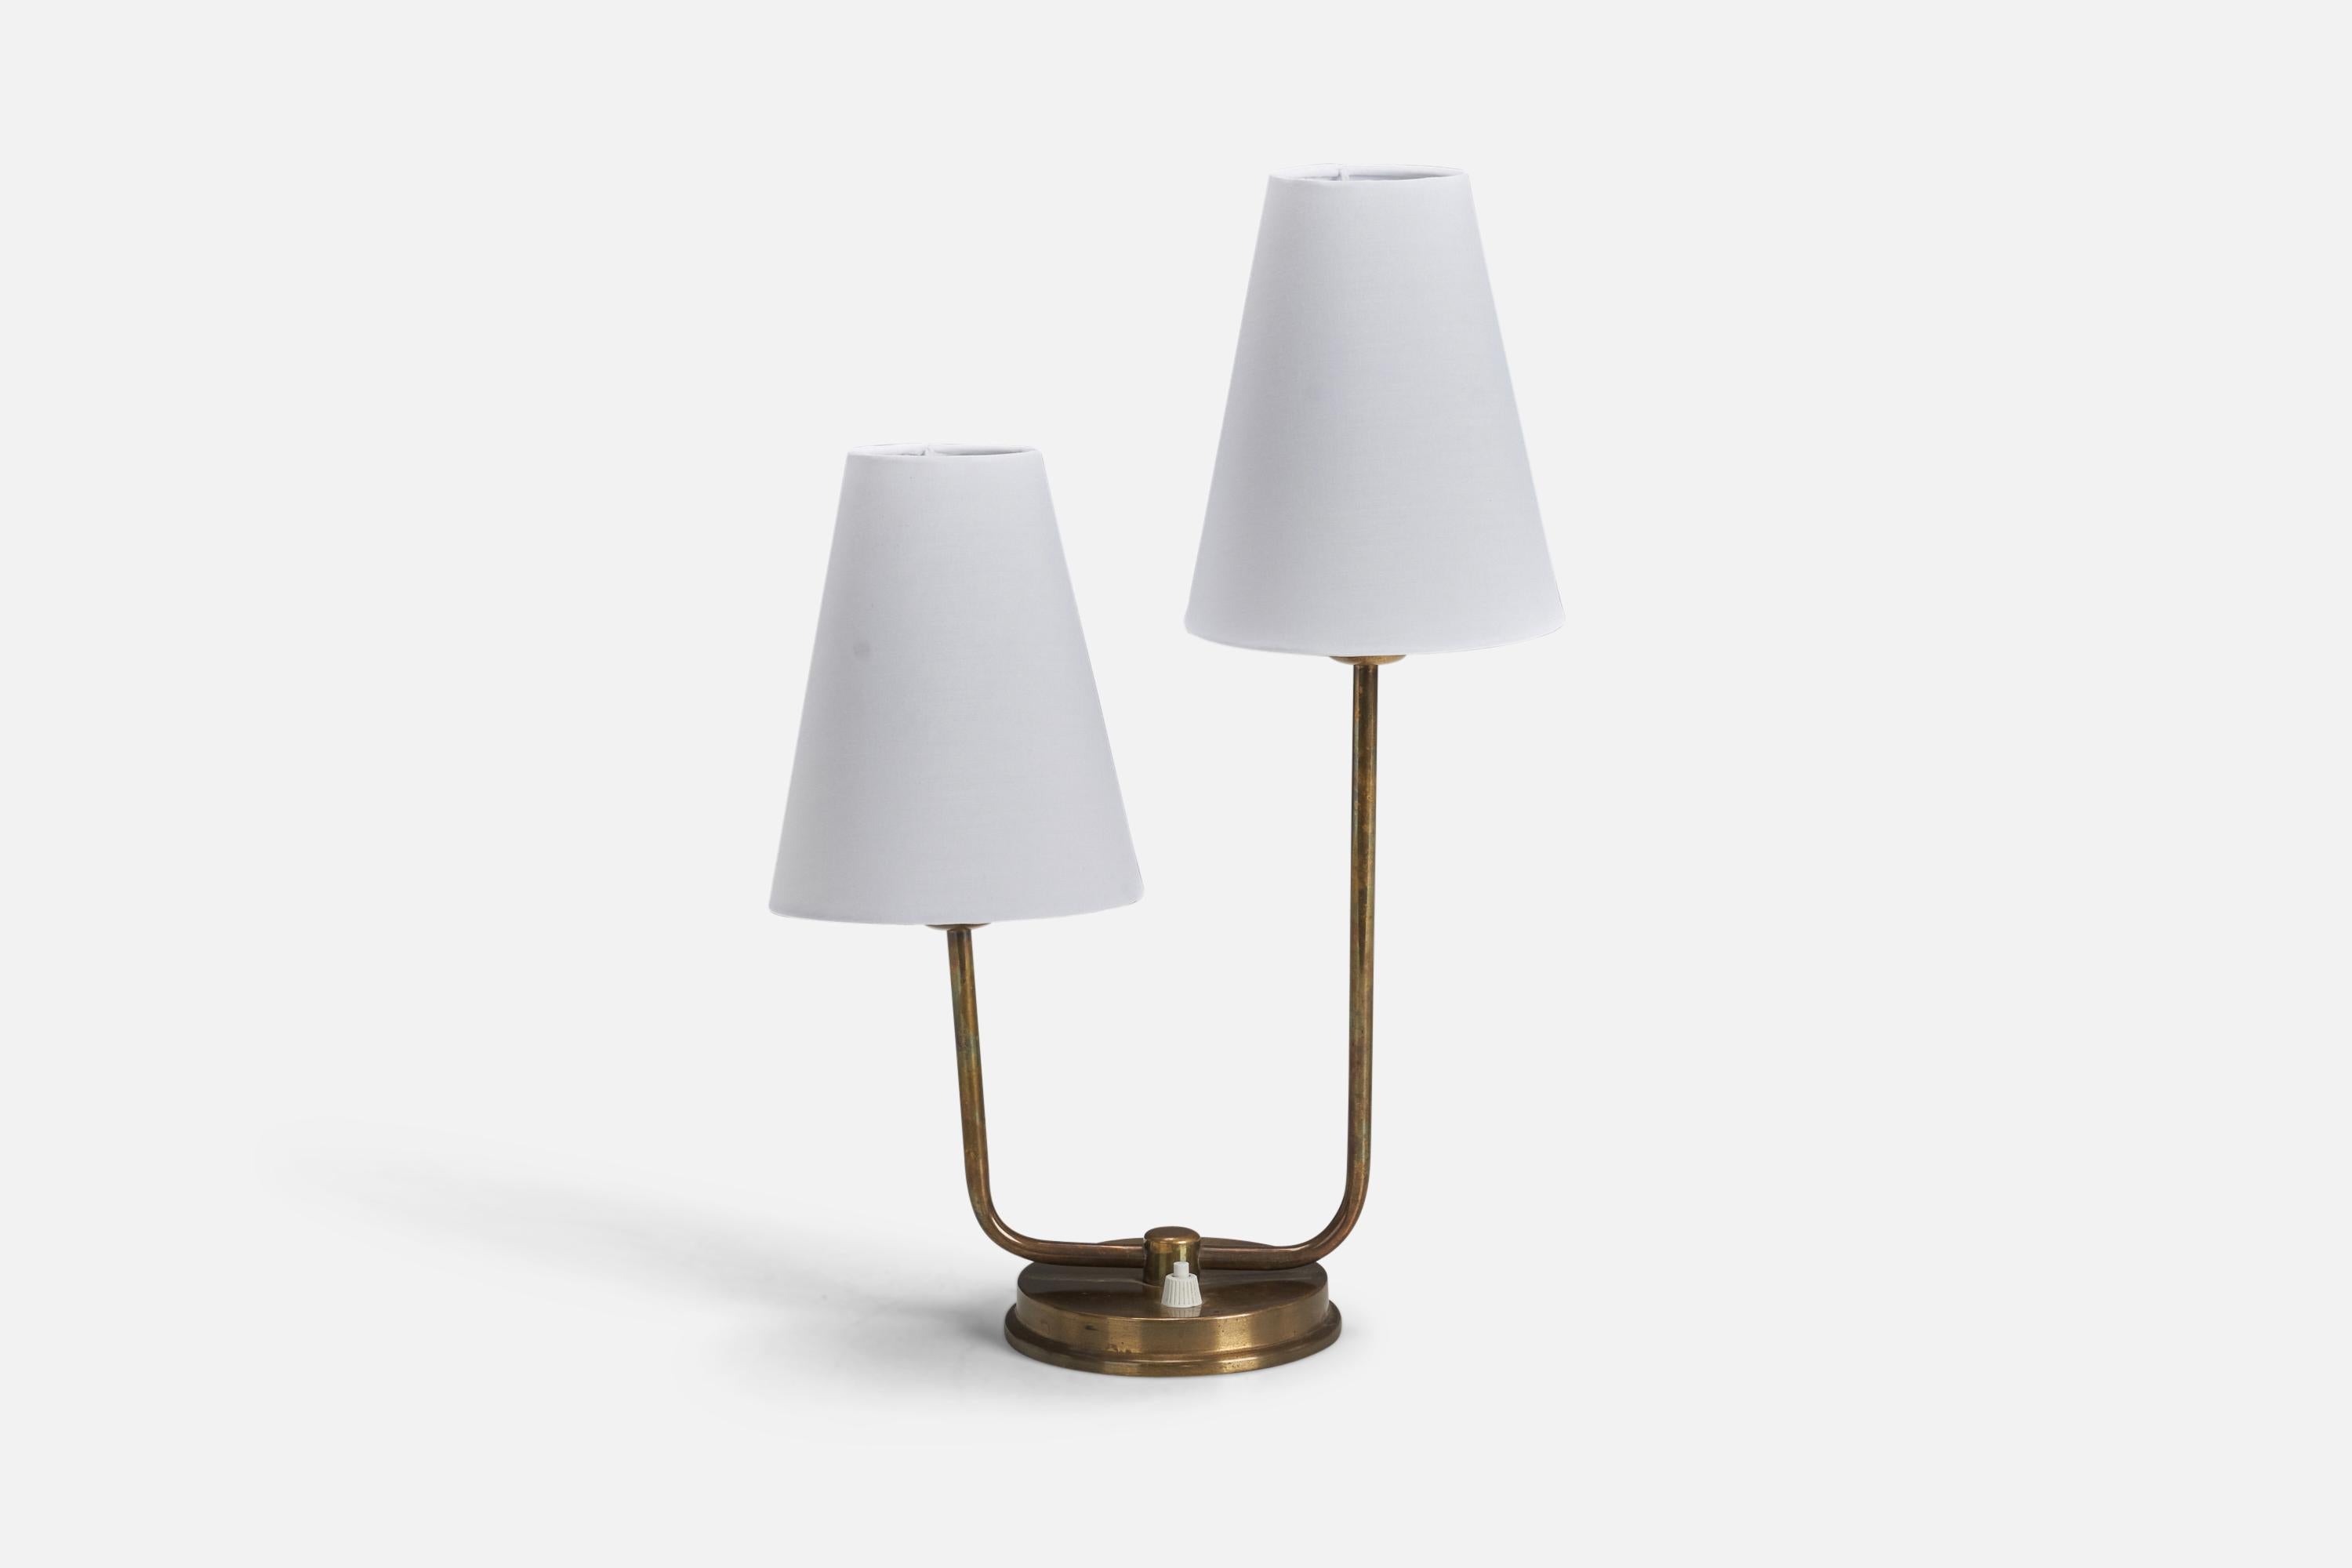 A brass and fabric table lamp designed and produced by a Swedish Designer, Sweden, 1940s.

Dimensions of Lamp (inches) : 12.5 x 8 x 5 (Height x Width x Depth)
Dimensions of Lampshade (inches) : 2.75 x 5.5 x 6.75 (Top Diameter x Bottom Diameter x